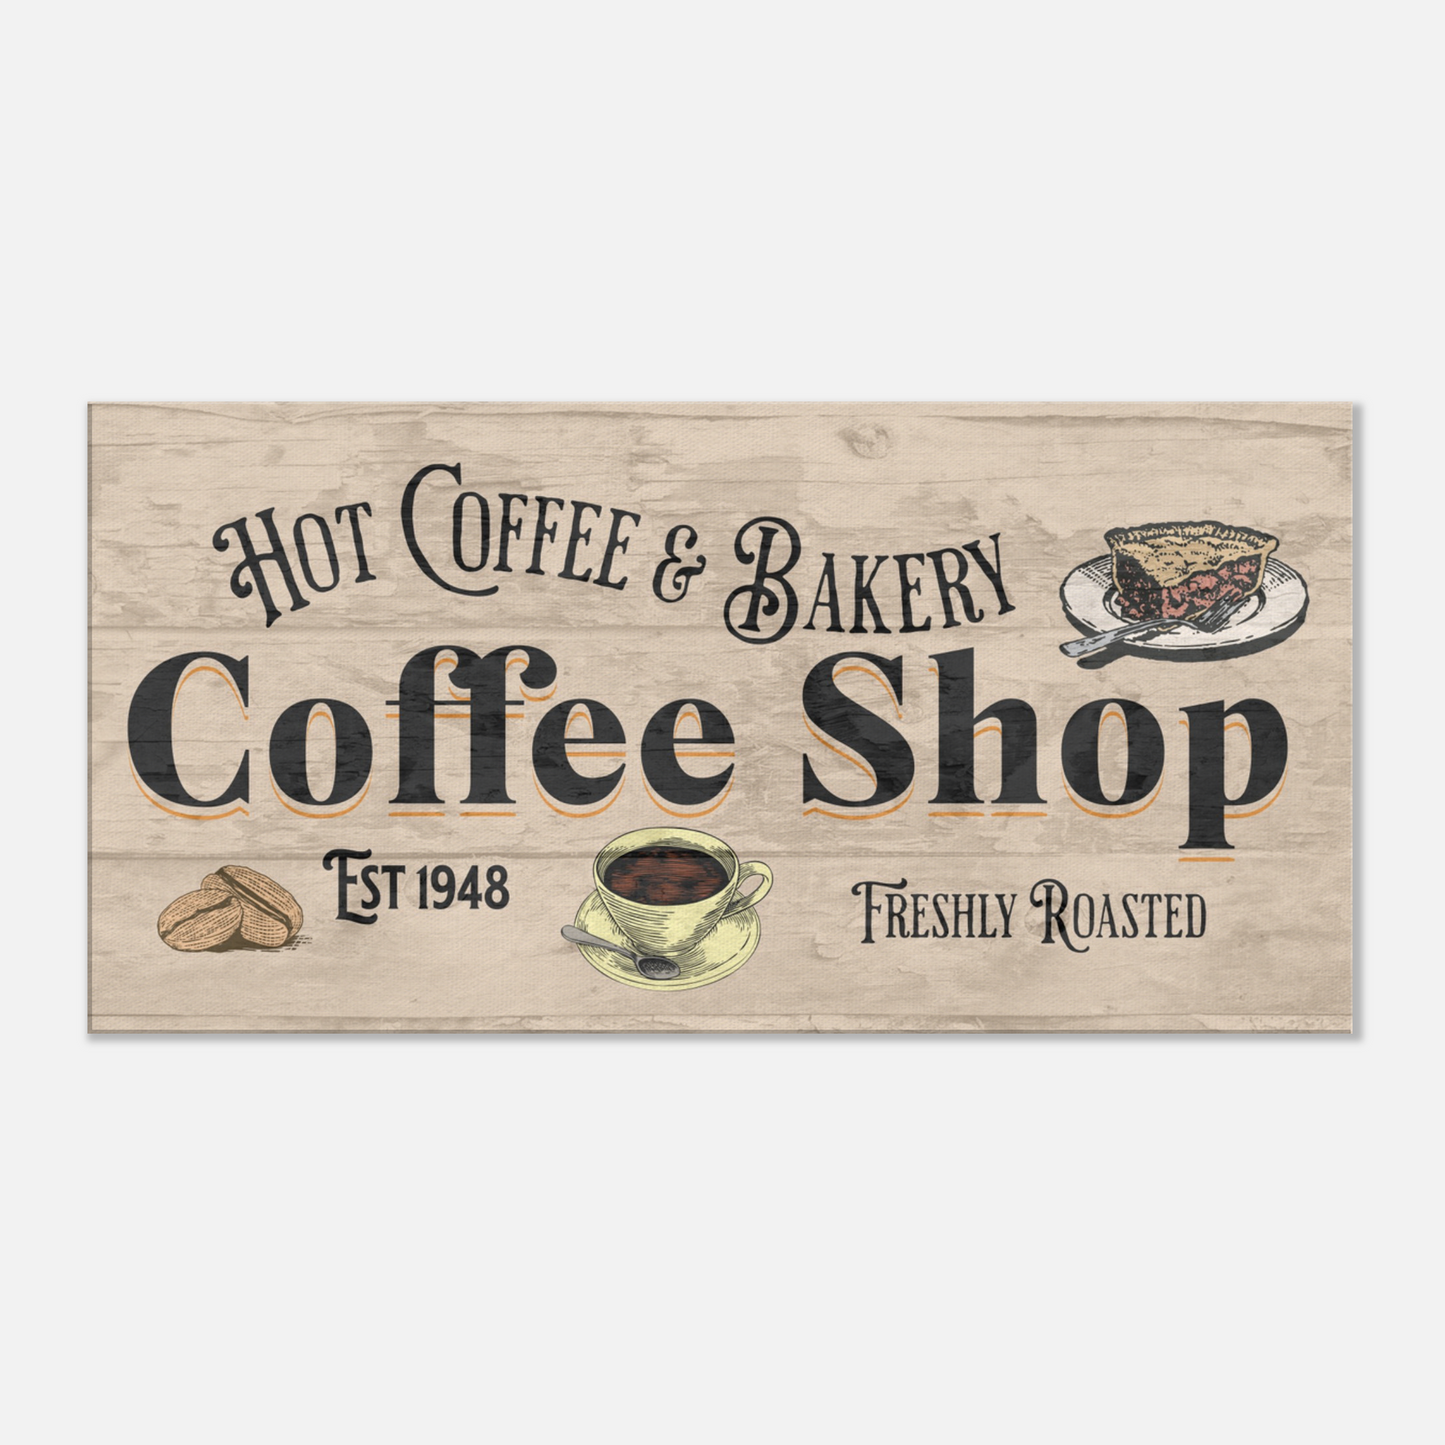 Coffee Shop & Bakery Canvas Wall Prints at Java Good Coffee